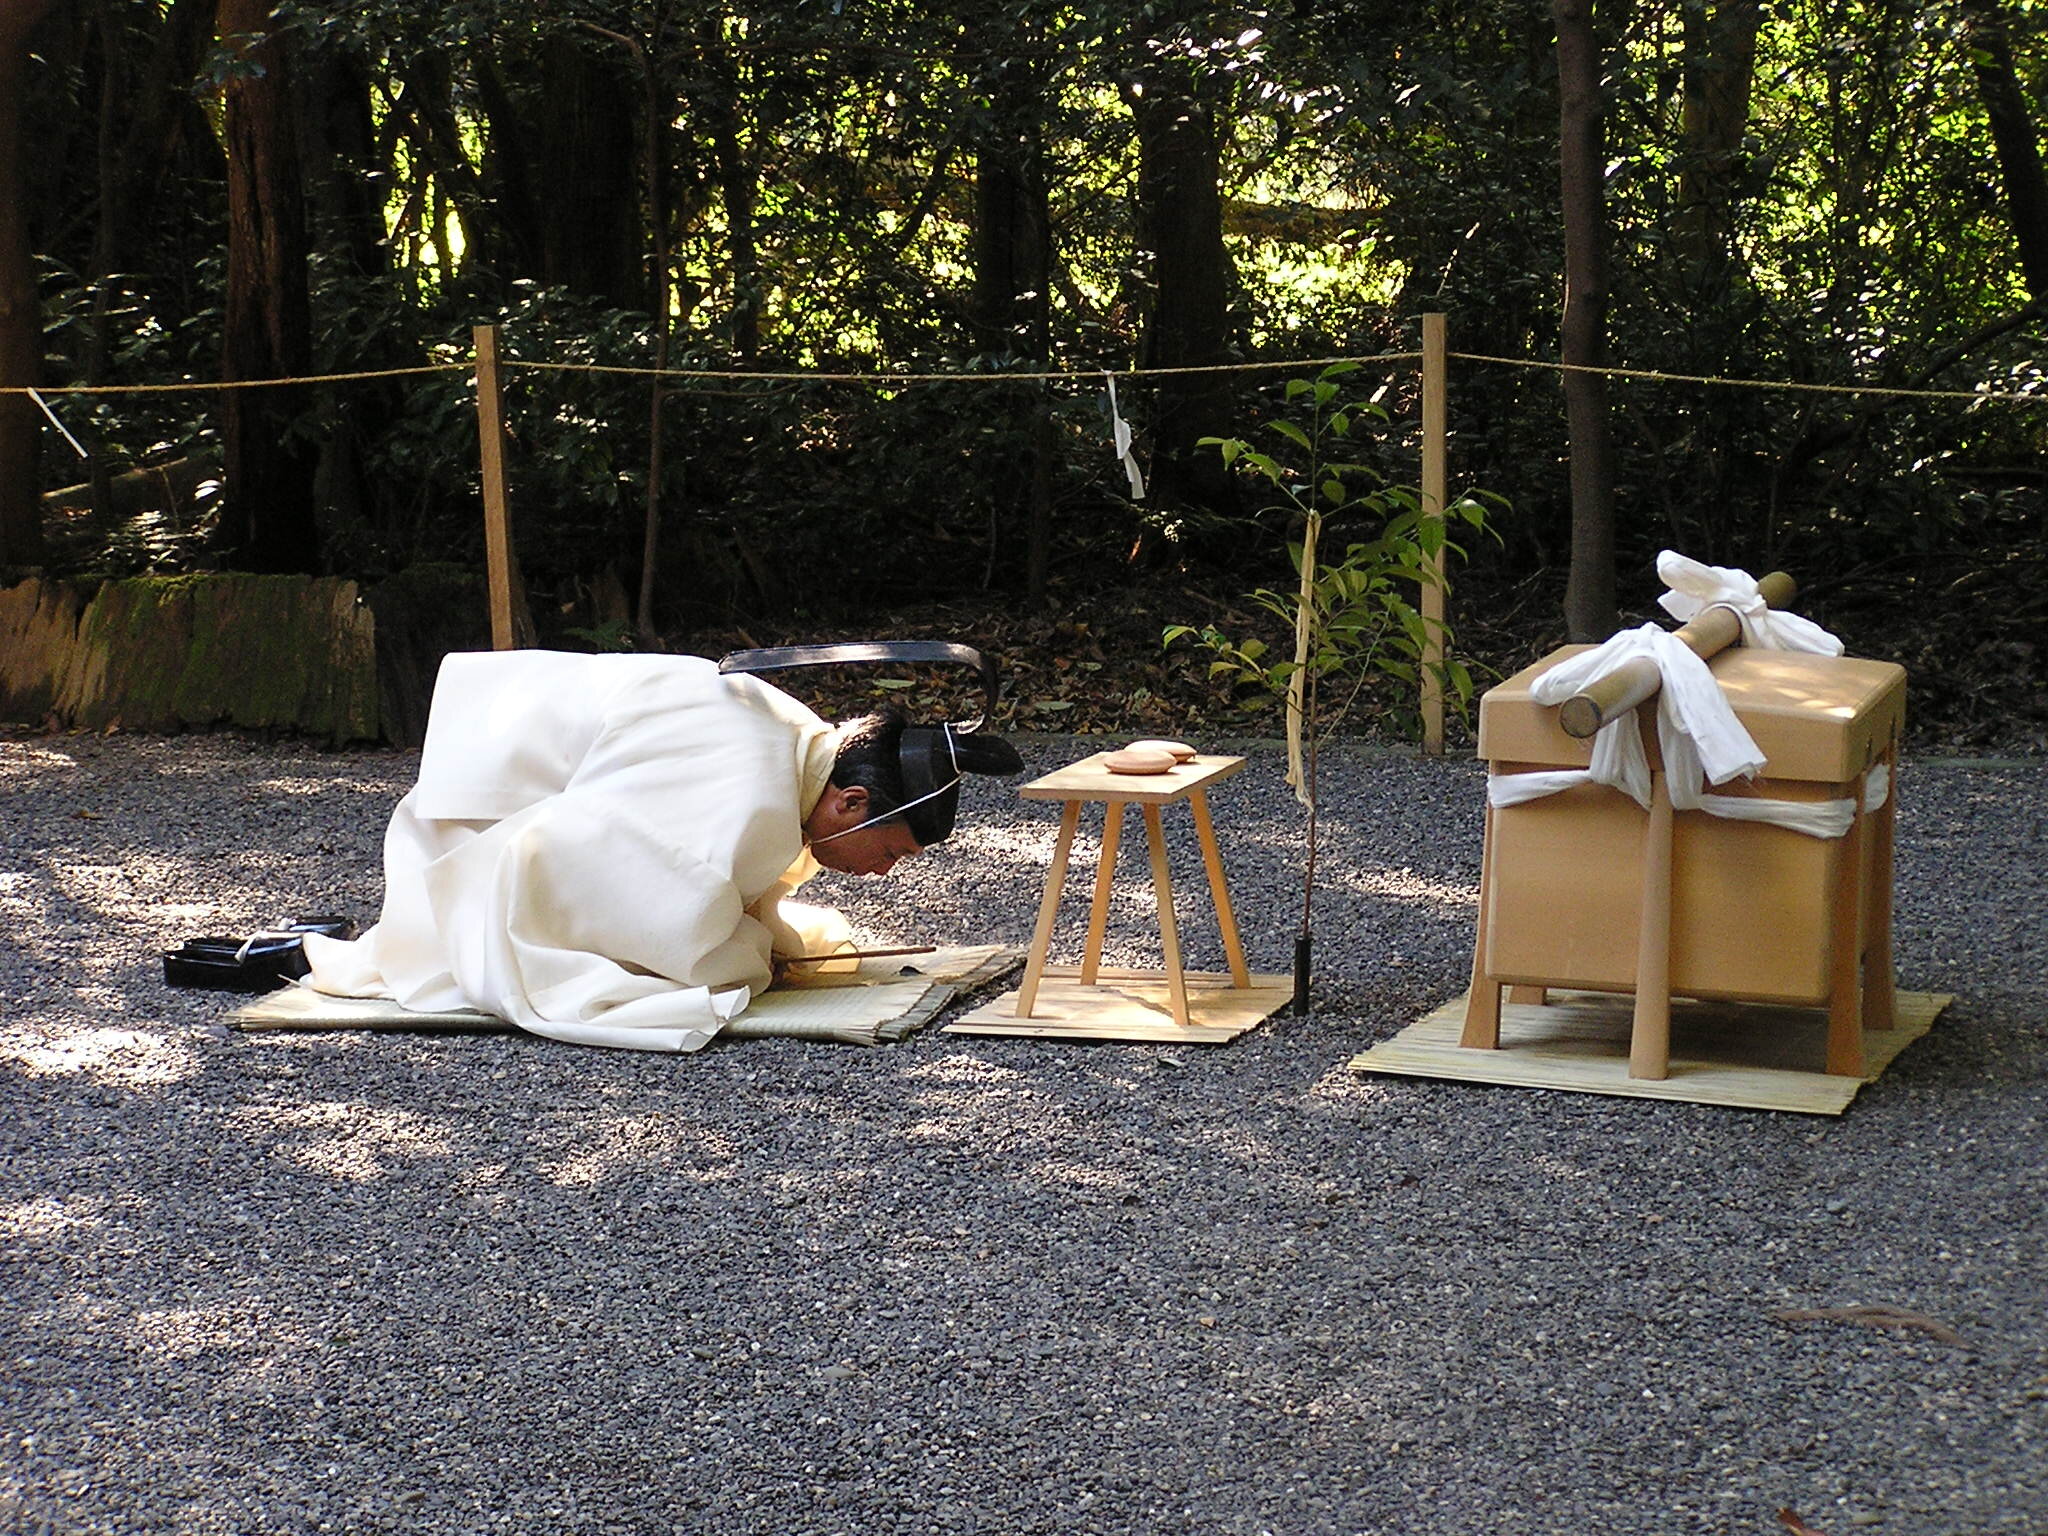 Shinto priests bowing